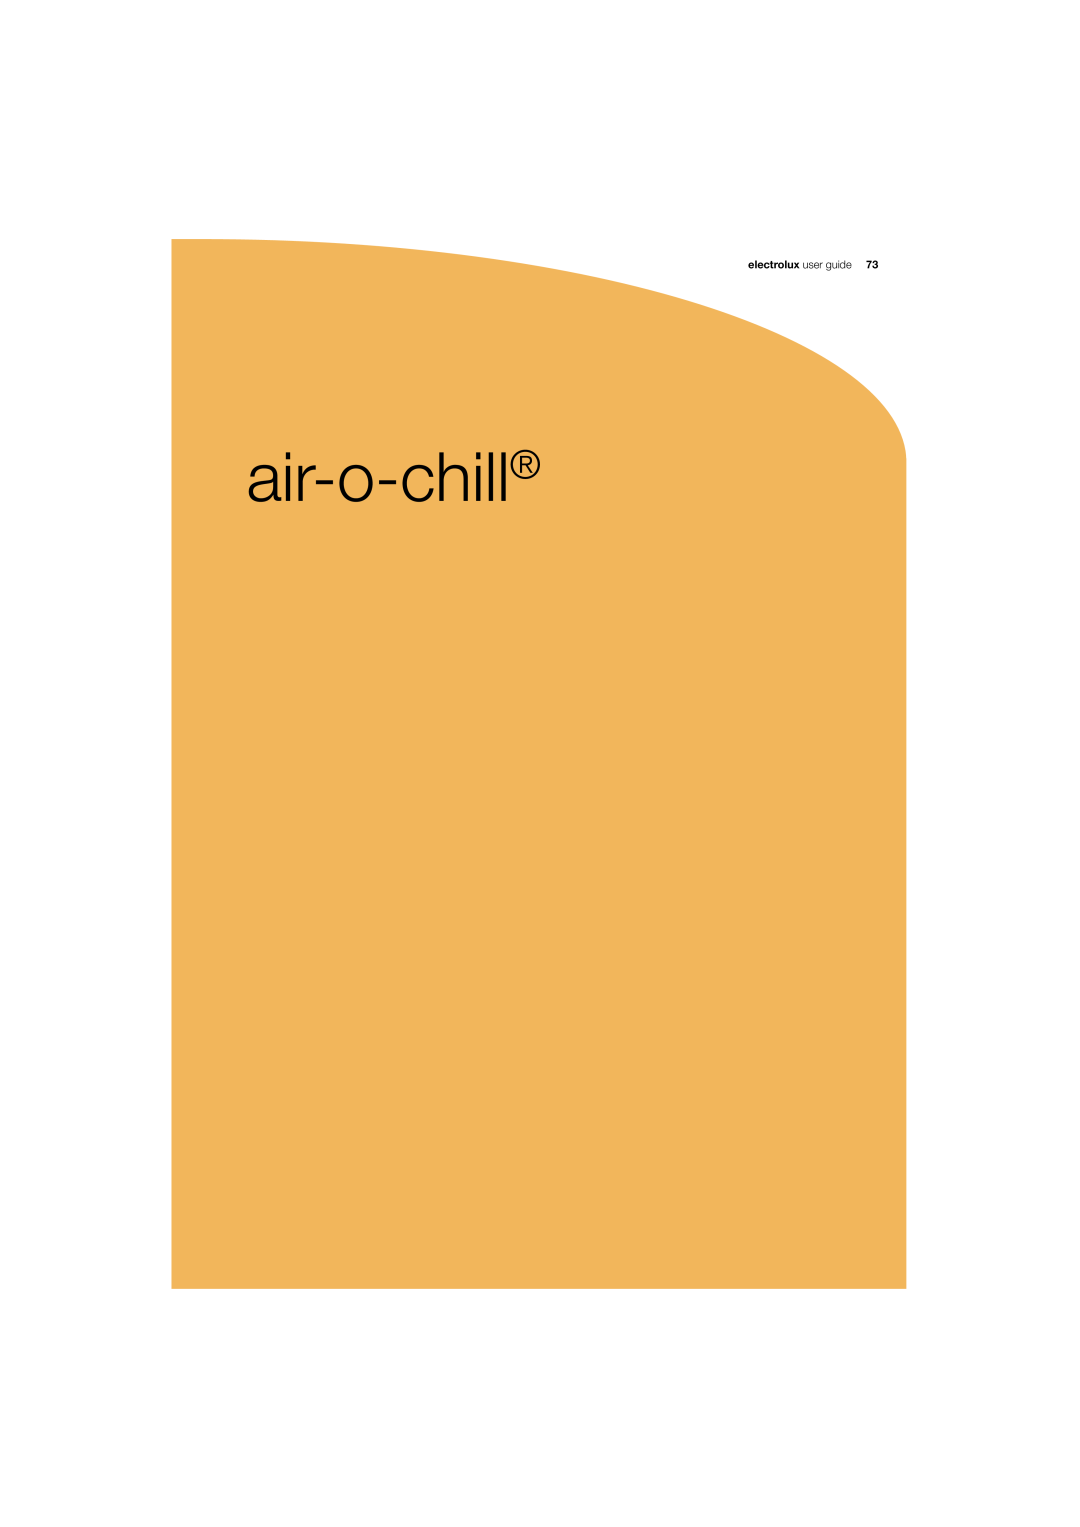 Electrolux 180 manual air-o-chill, electrolux user guide 